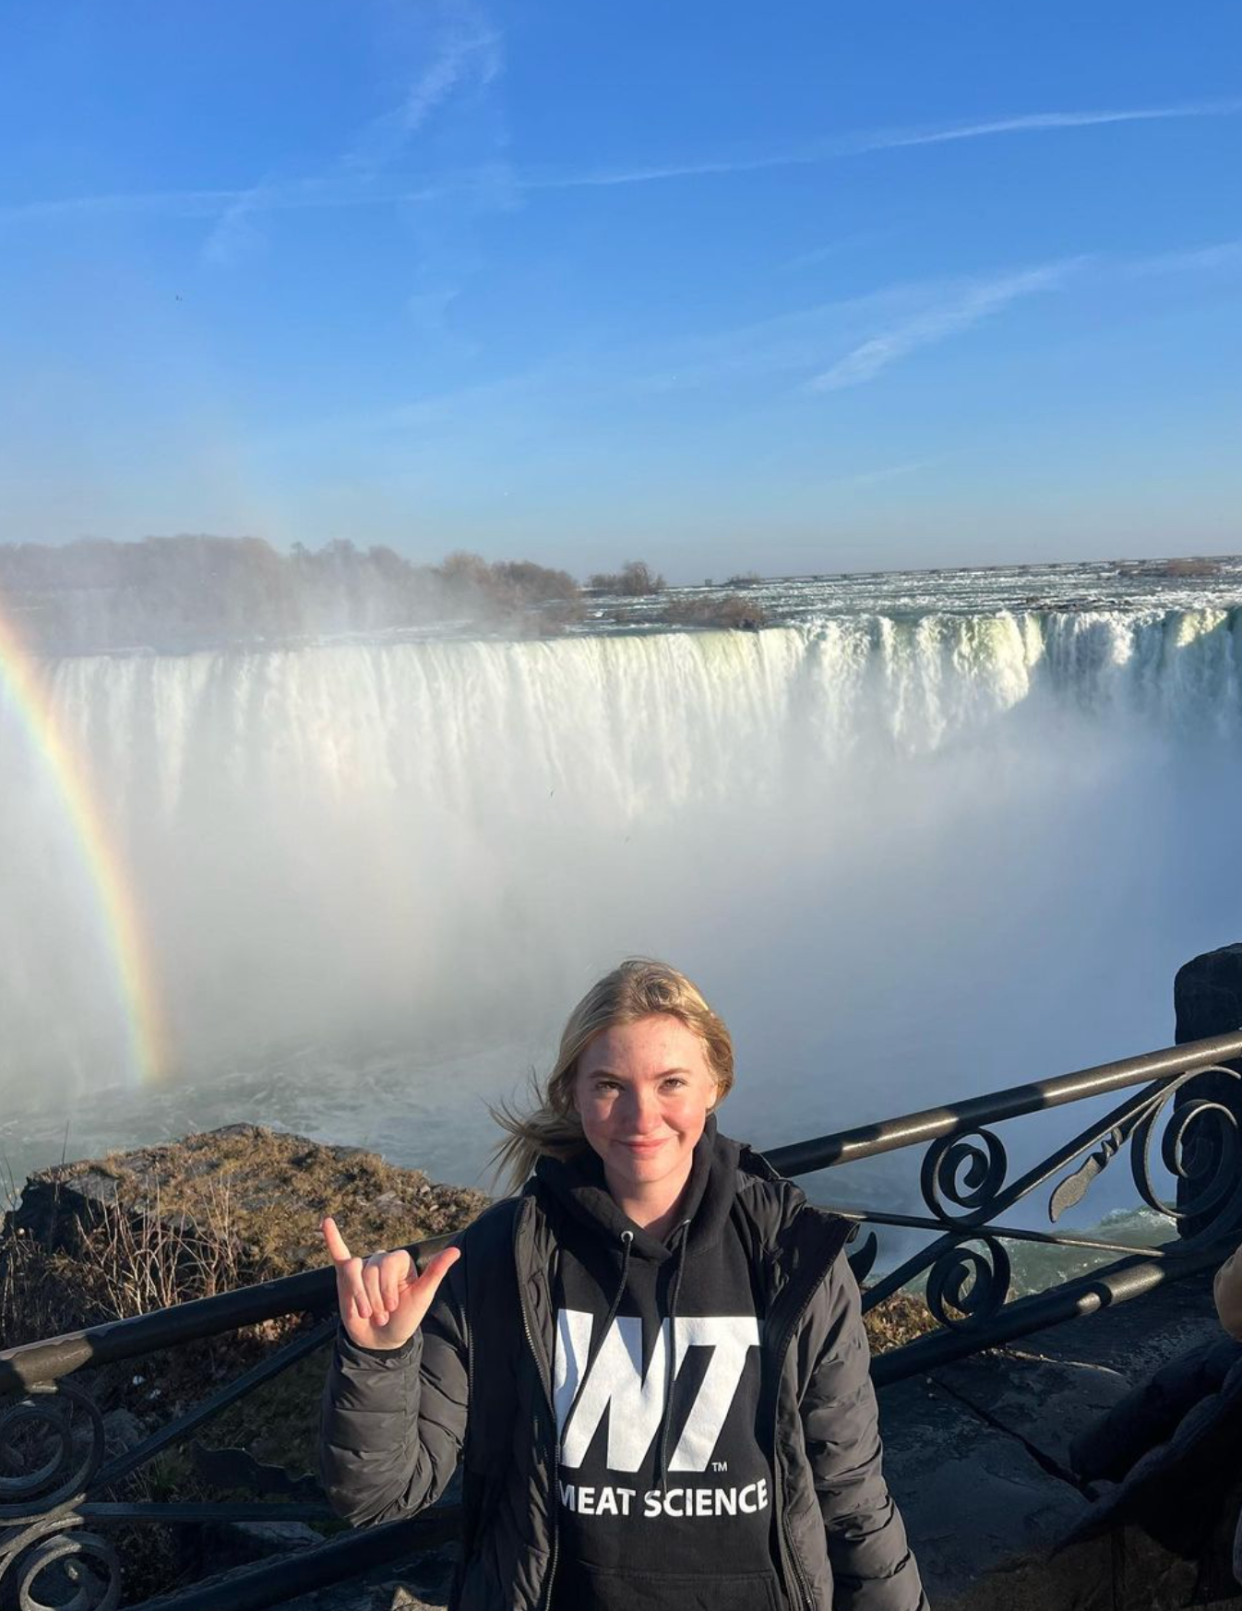 Brenlea Broyles, a freshman animal science major from Spring Branch, won third place and a $500 scholarship in an Instagram contest for a photo of her flashing the Buff hand sign at Niagra Falls.